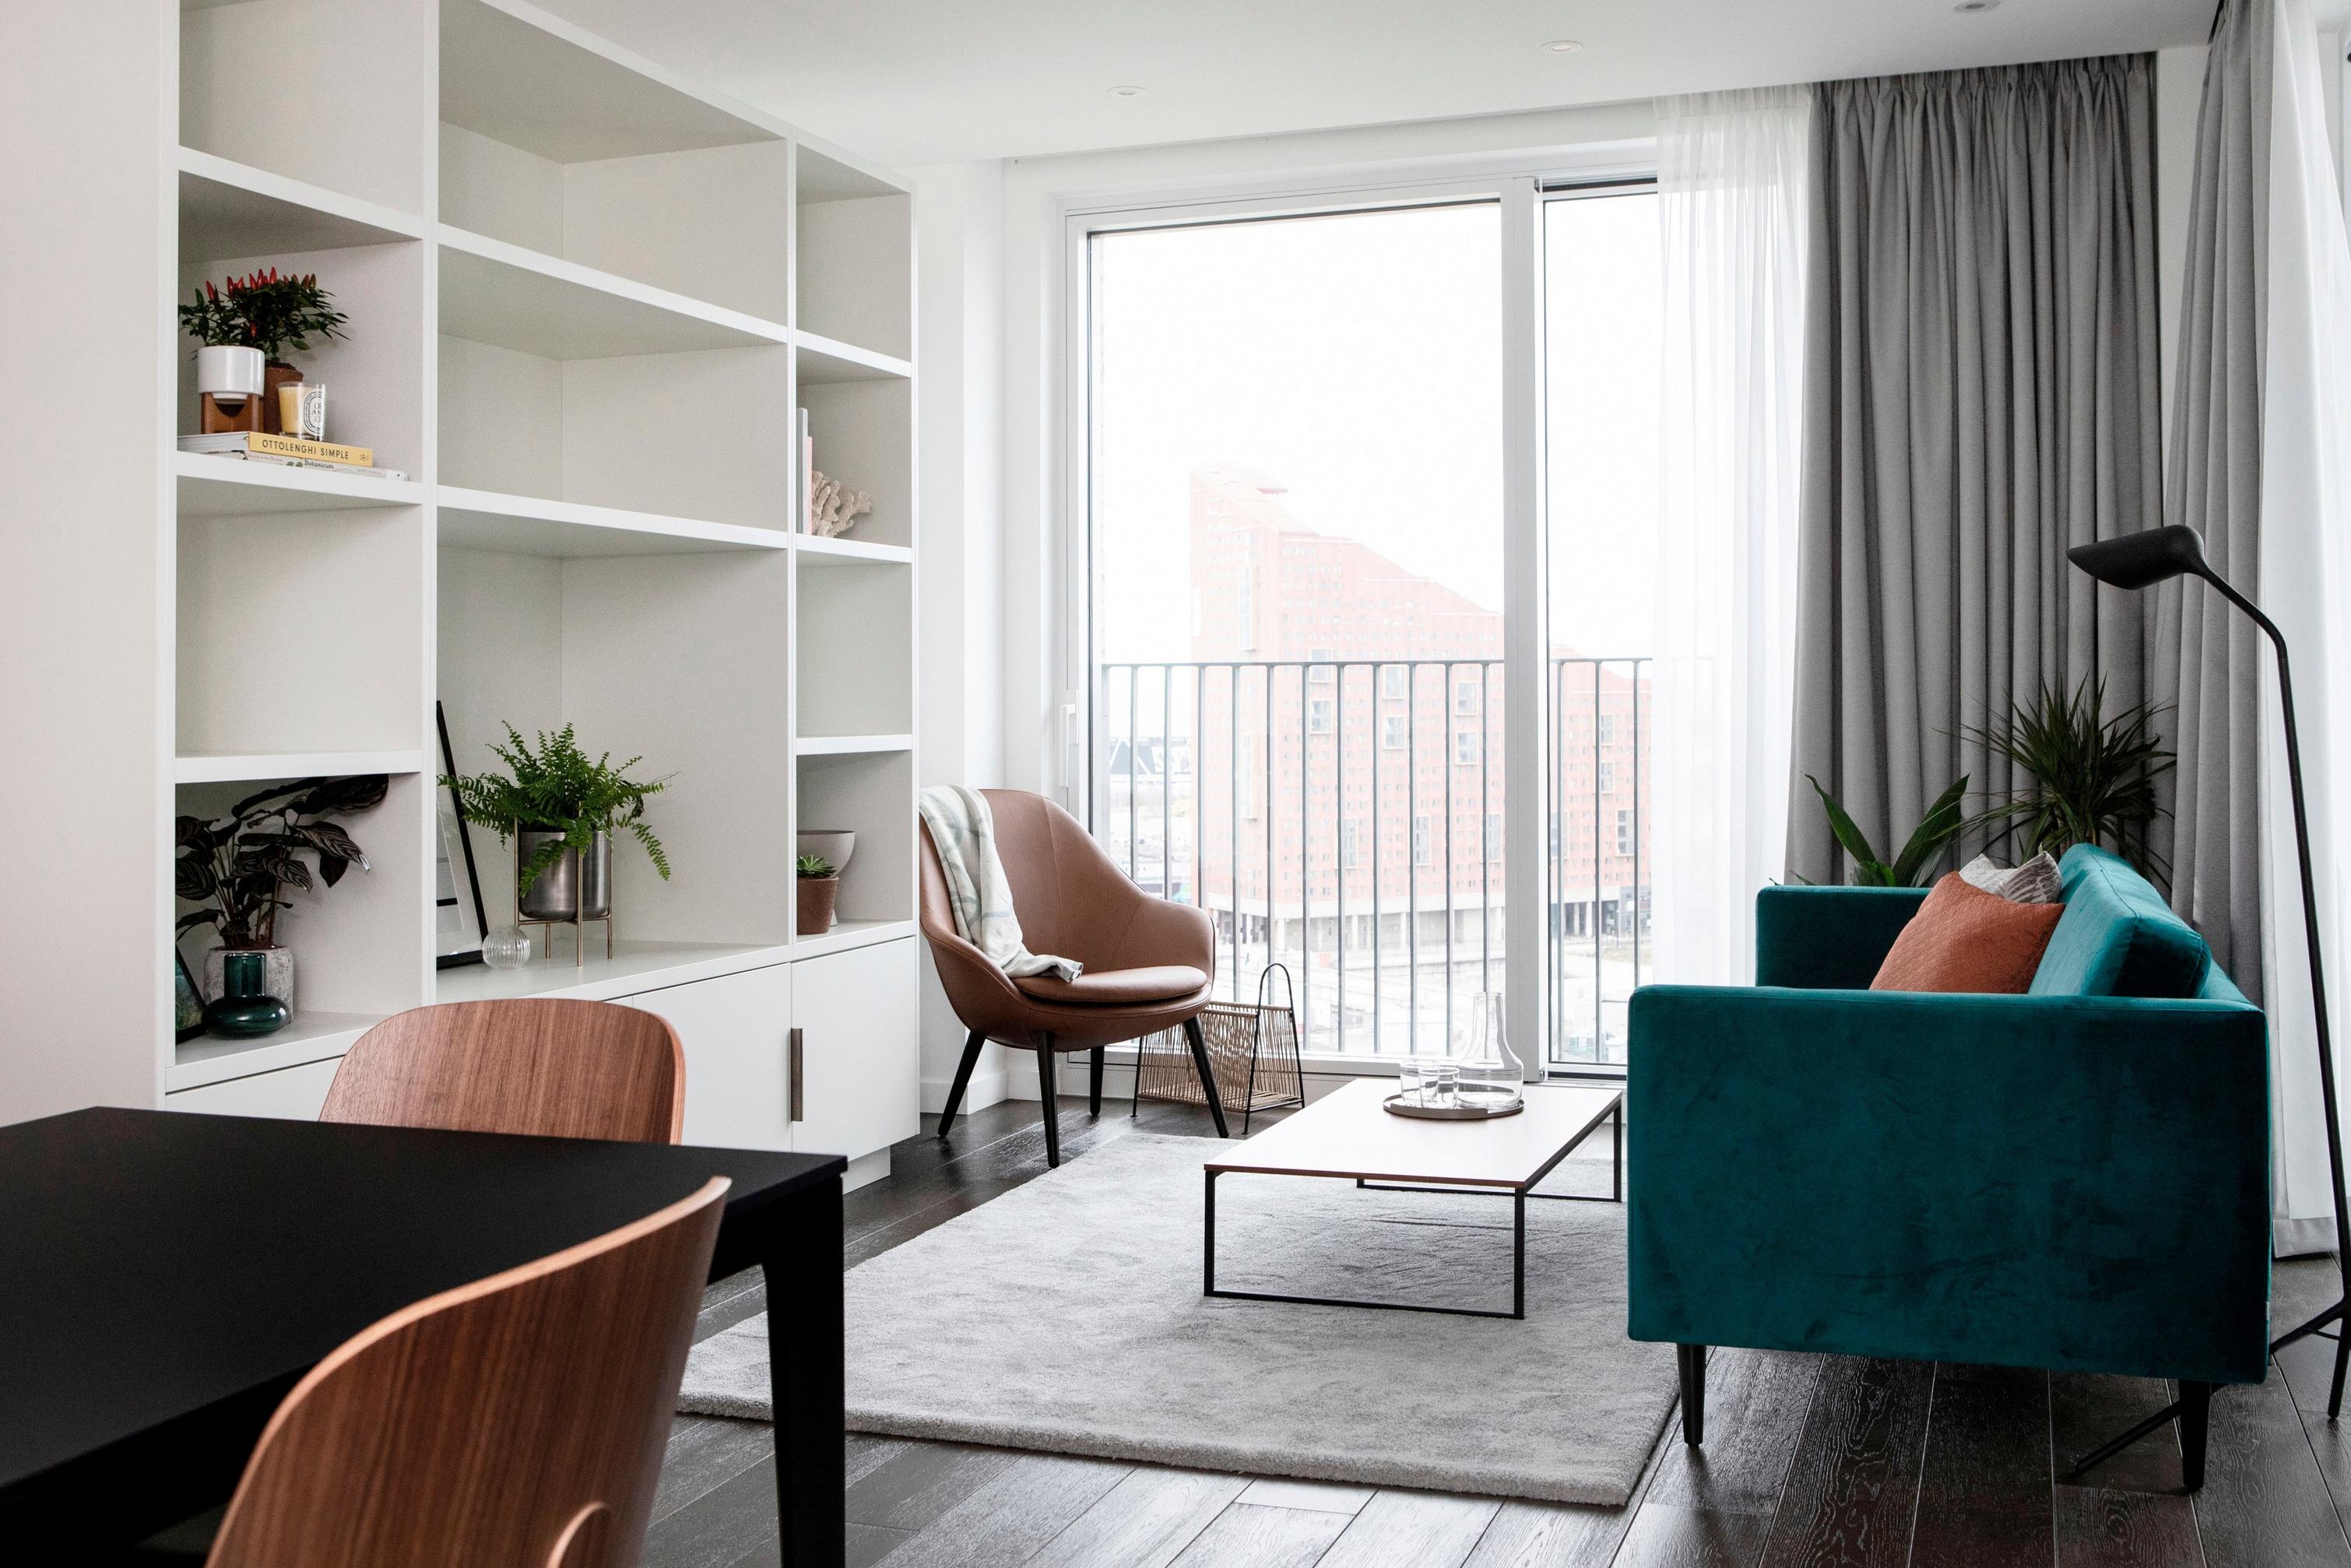 Bright room with bookshelf, chairs, and balcony access, with city view.